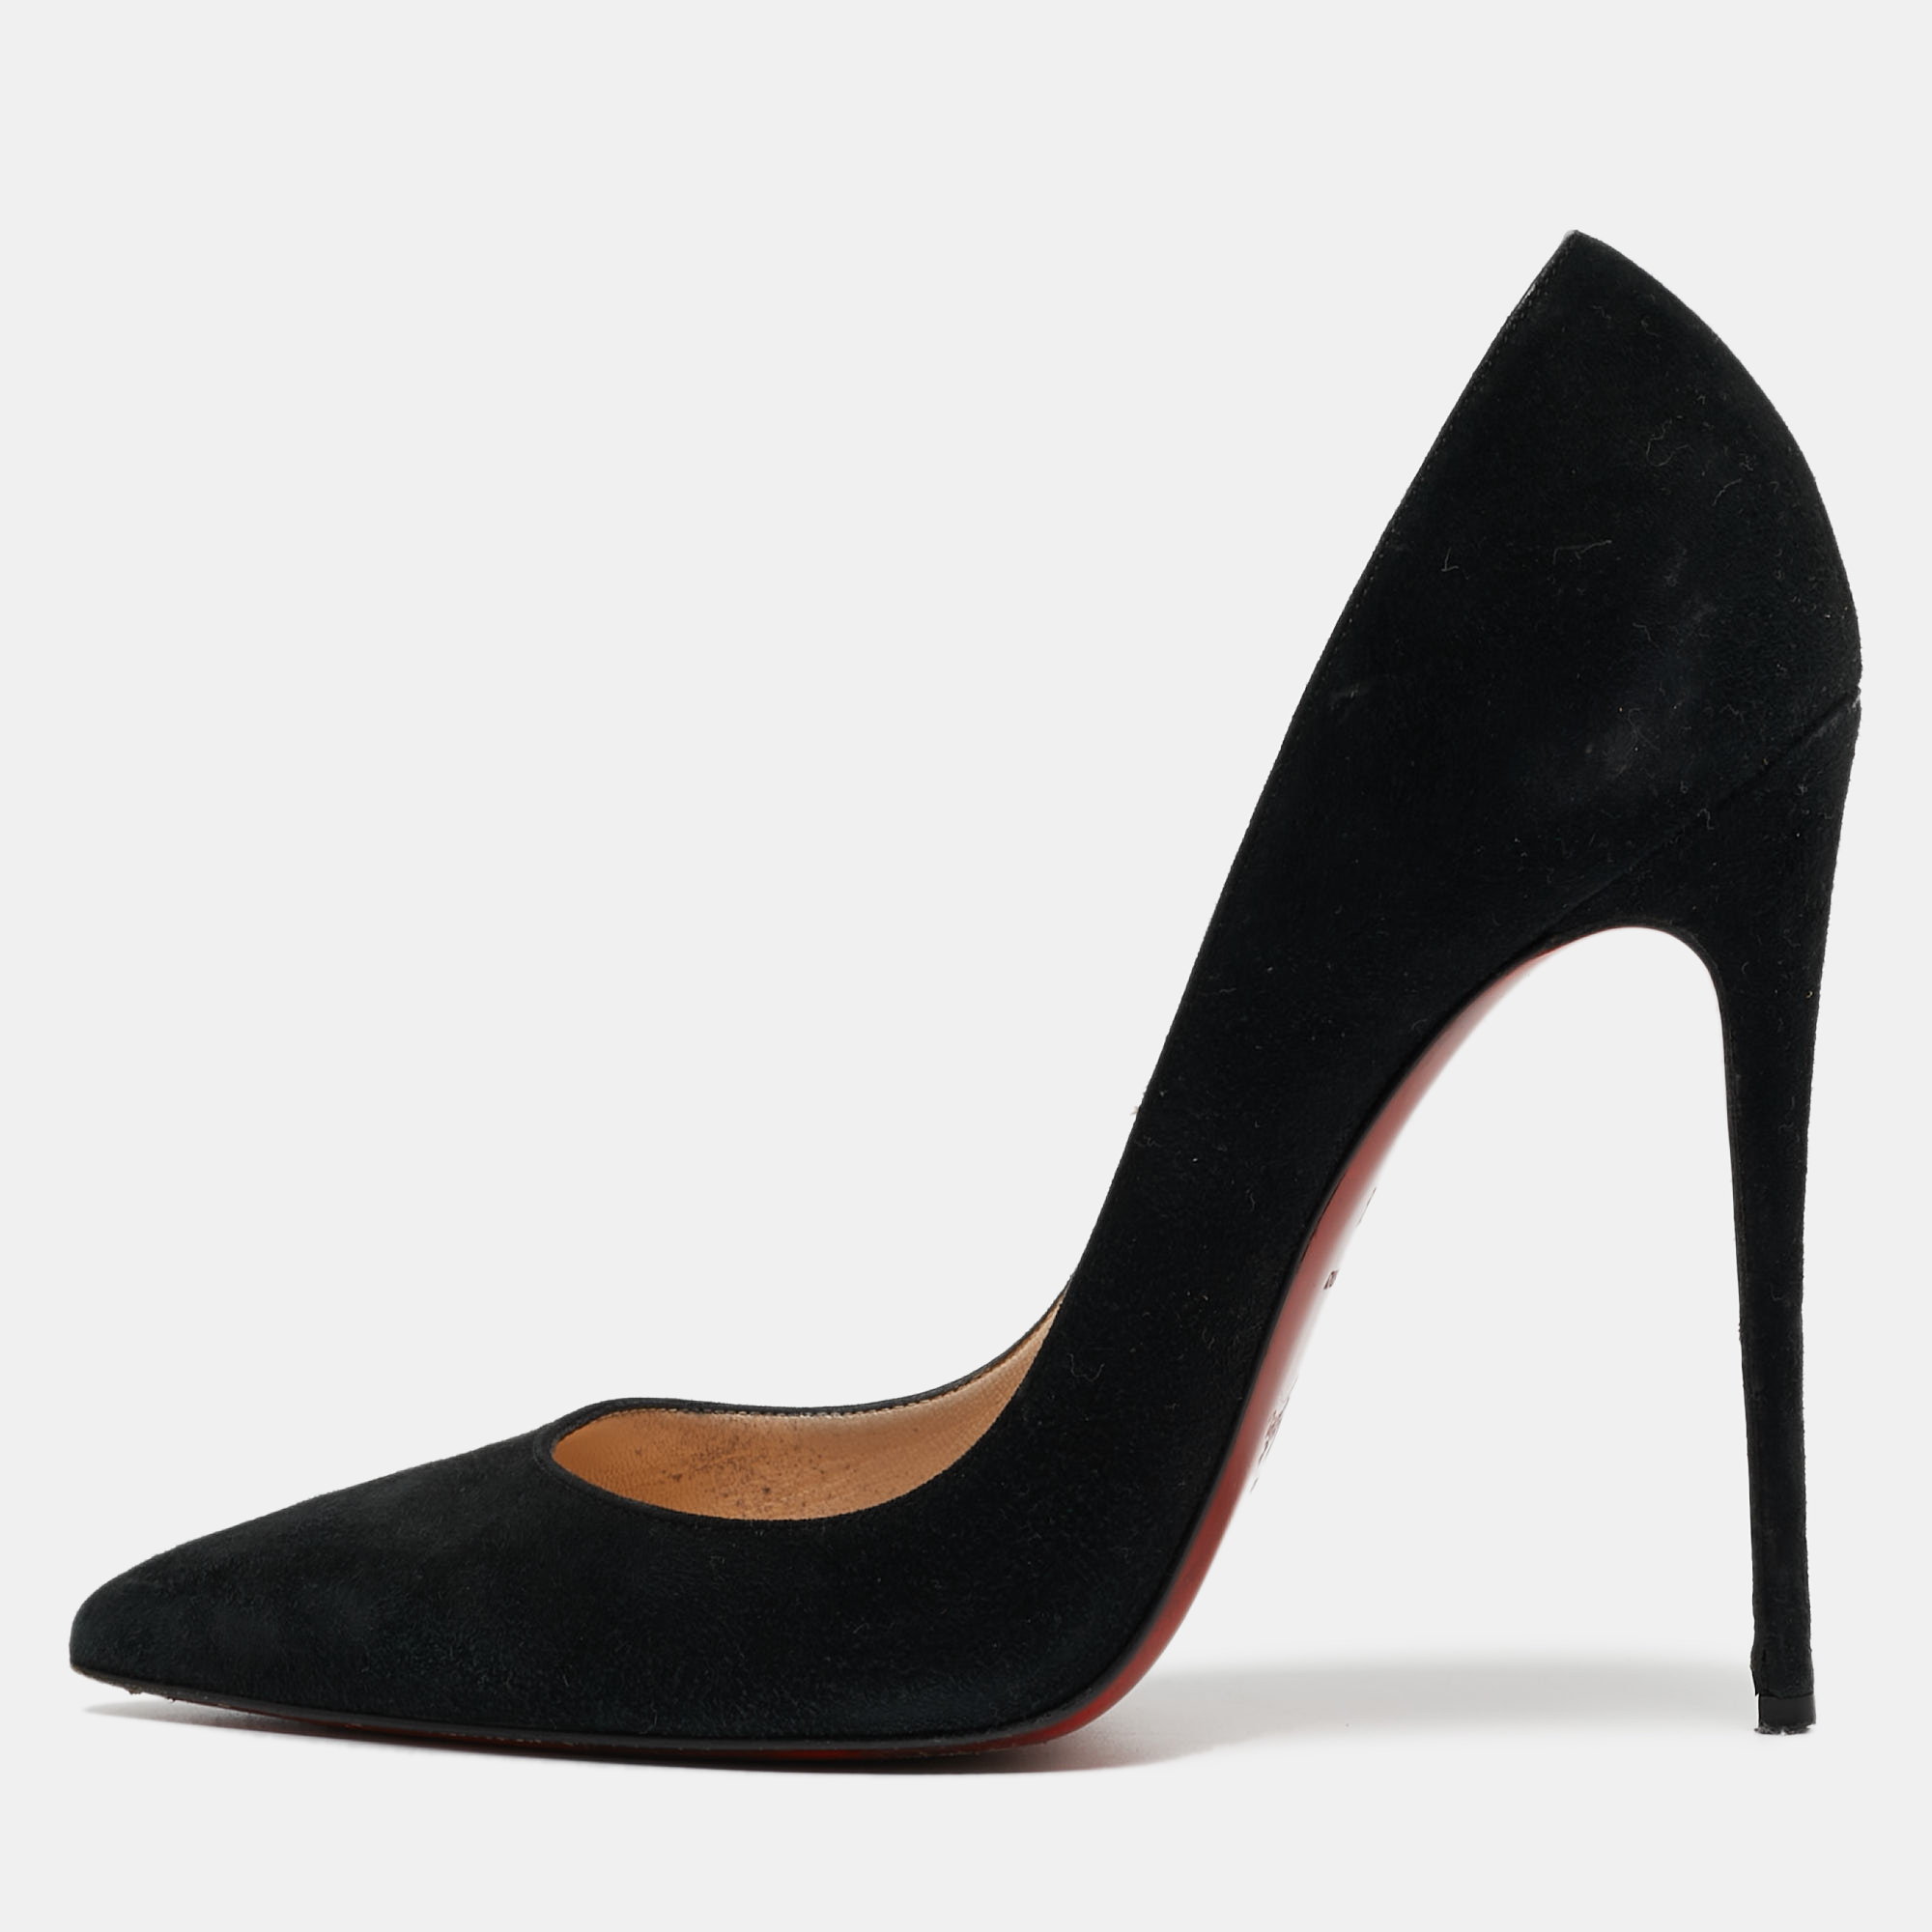 Pre-owned Christian Louboutin Black Suede So Kate Pumps Size 38.5